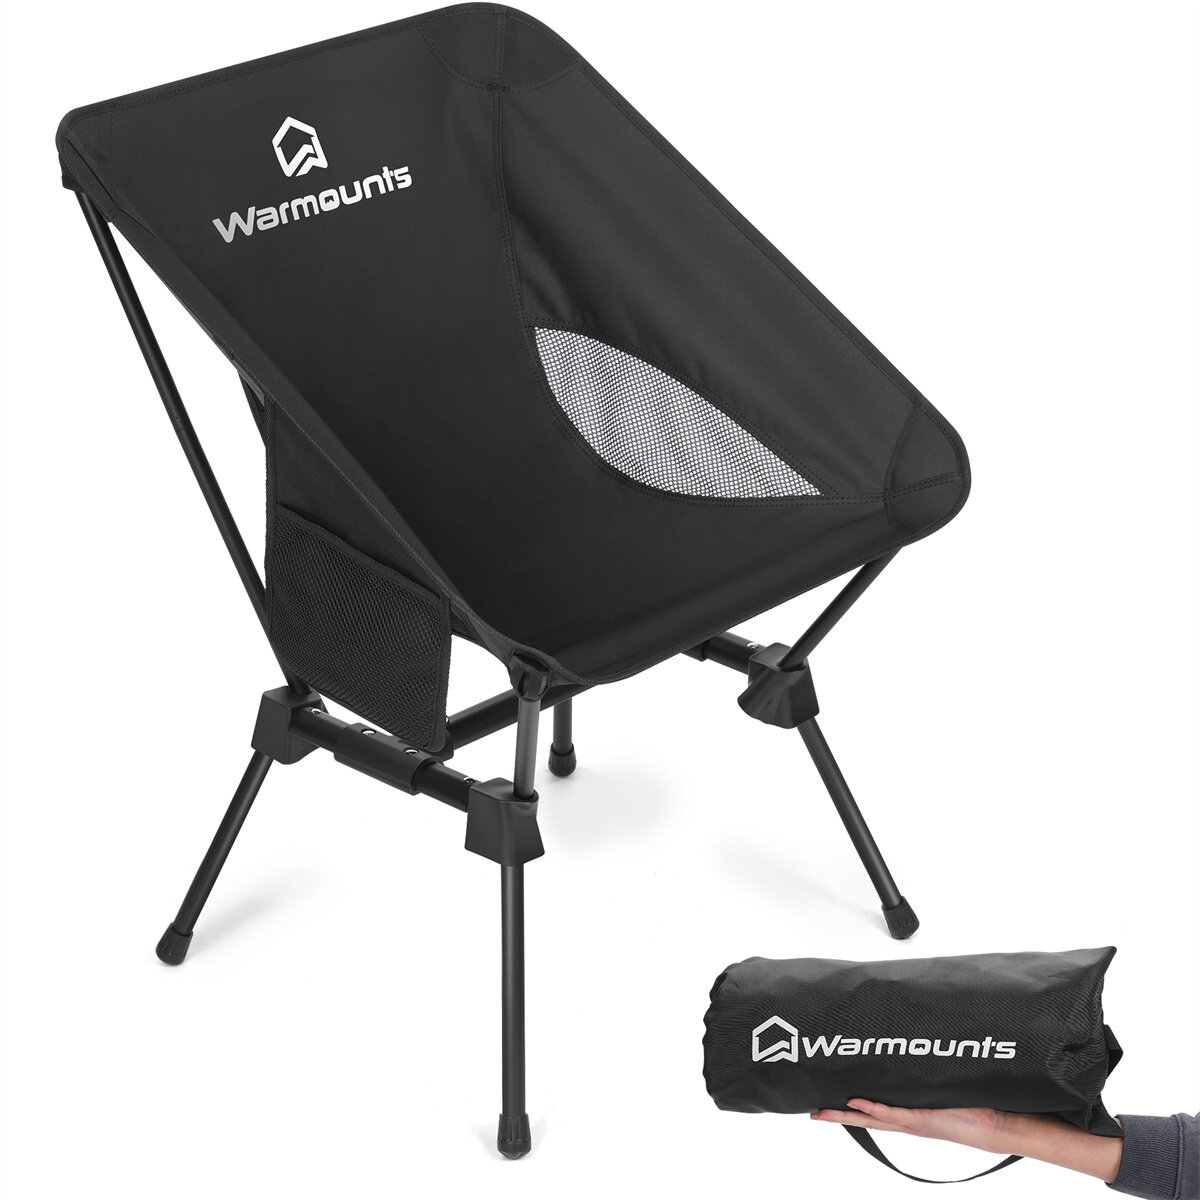 

WARMOUNTS Portable Camping Chair, 400LBS Folding Backpacking Chair w/ Side Pocket Carrying Bag, Ultralight Compact Beach